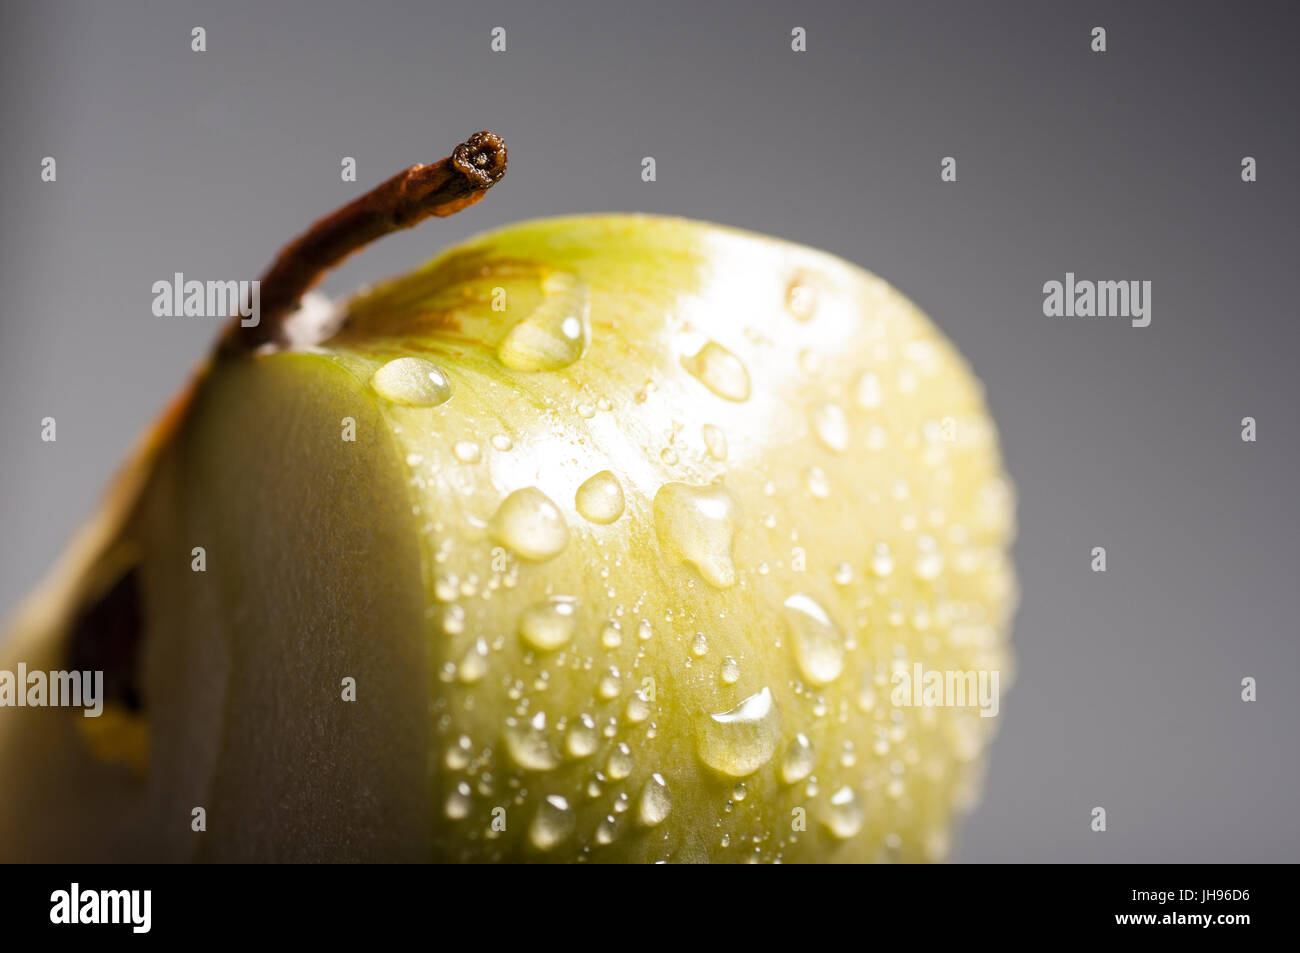 Artistic view of part of a wet apple. Studio Shoot Stock Photo